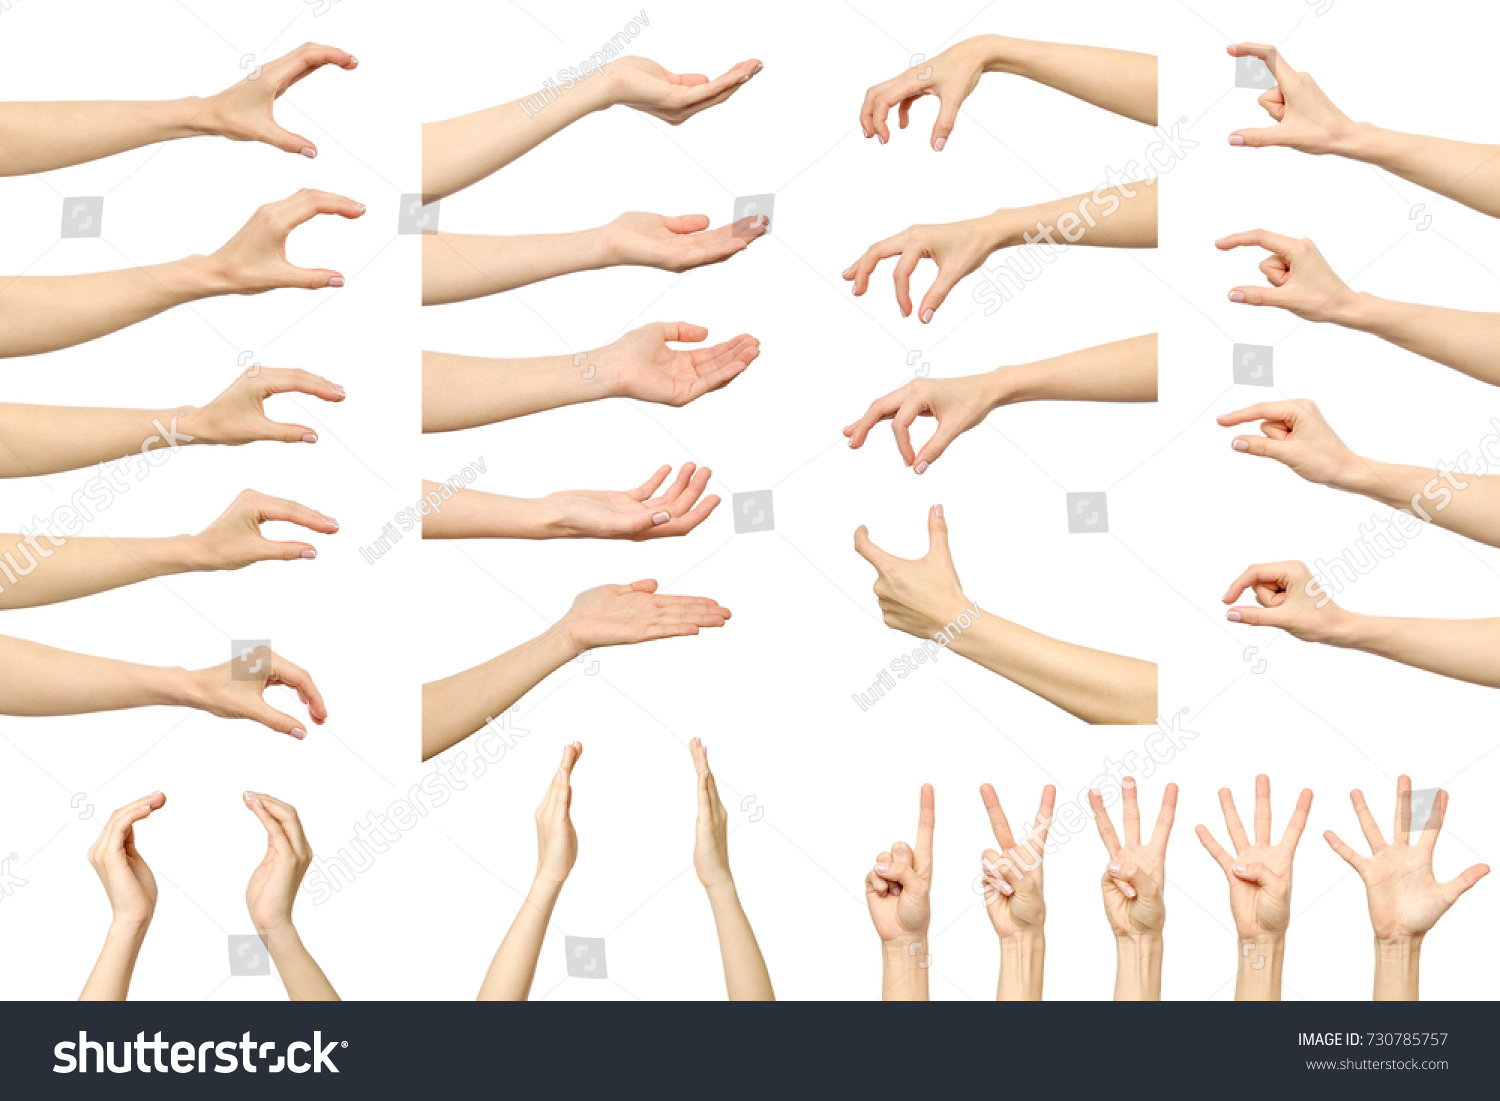 Set of woman's hand measuring invisible items. Isolated on white #730785757